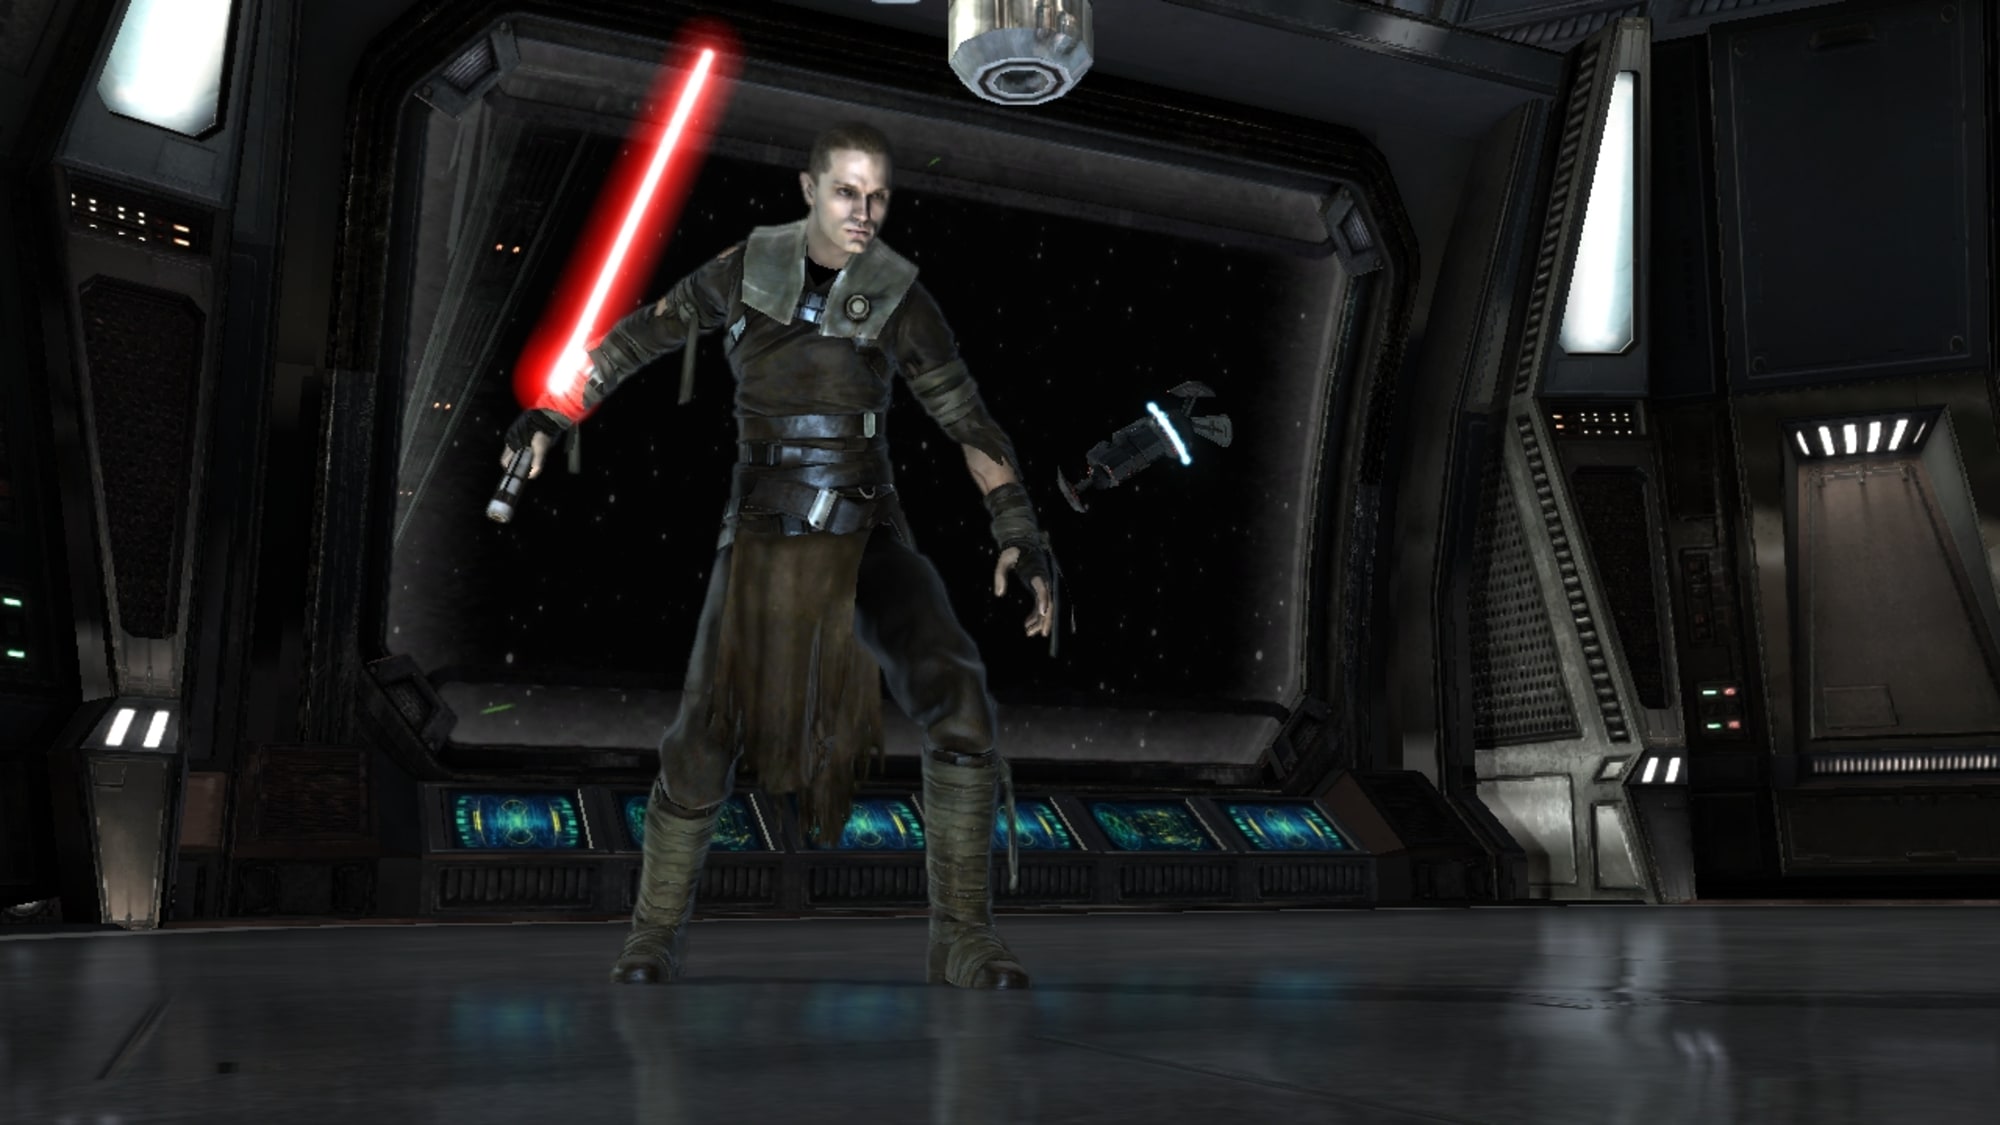 Игра star wars the force unleashed. Star Wars Starkiller 2 костюмы. Star Wars: the Force unleashed - Ultimate Sith Edition. Star Wars the Force unleashed 1. Star Wars the Force unleashed 2008.